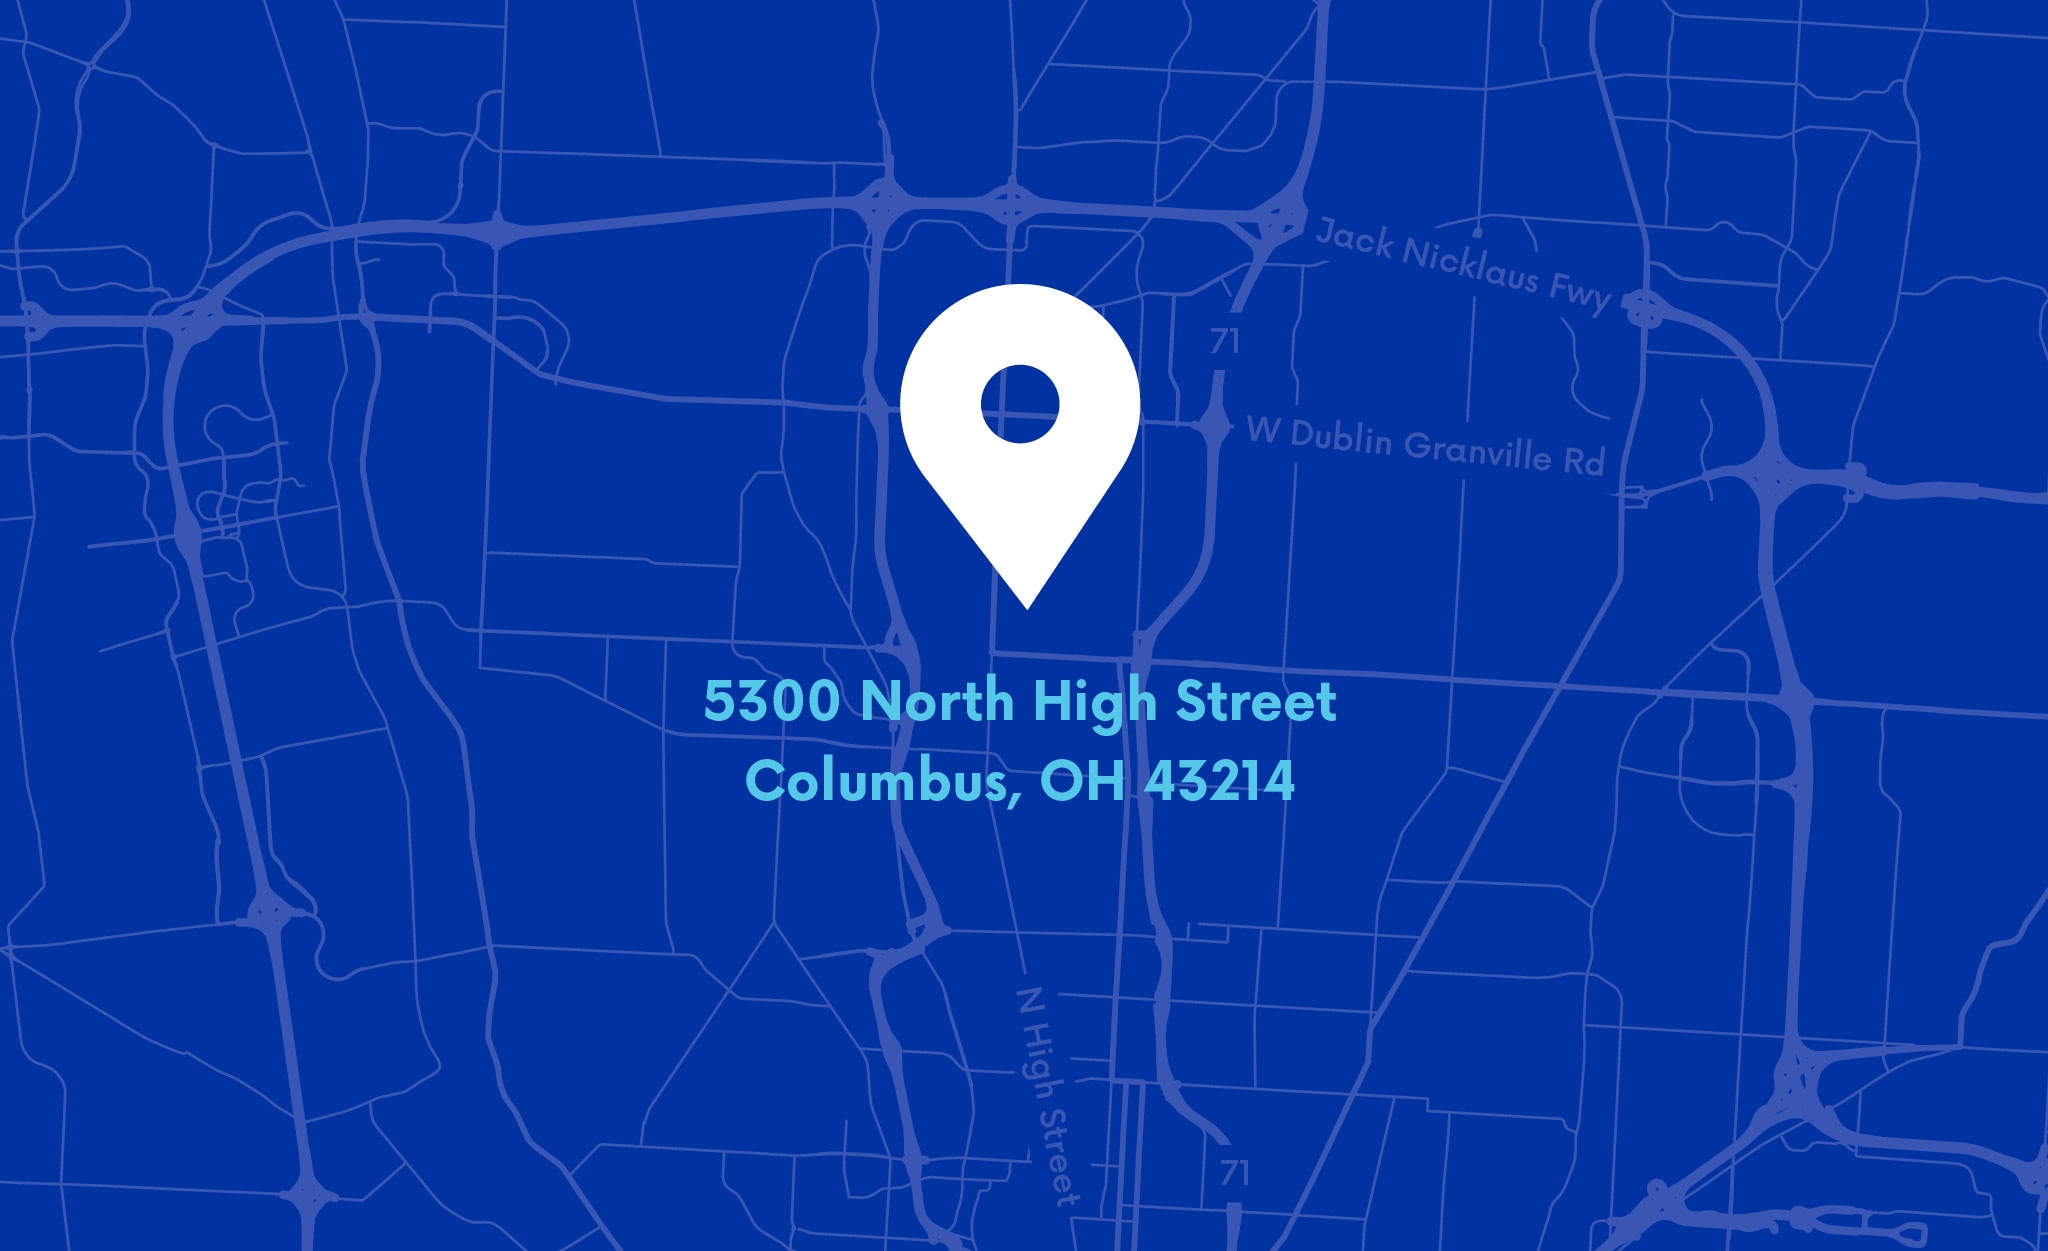 Illustrated map with a pin at 5300 North High Street, Columbus, Ohio 43214